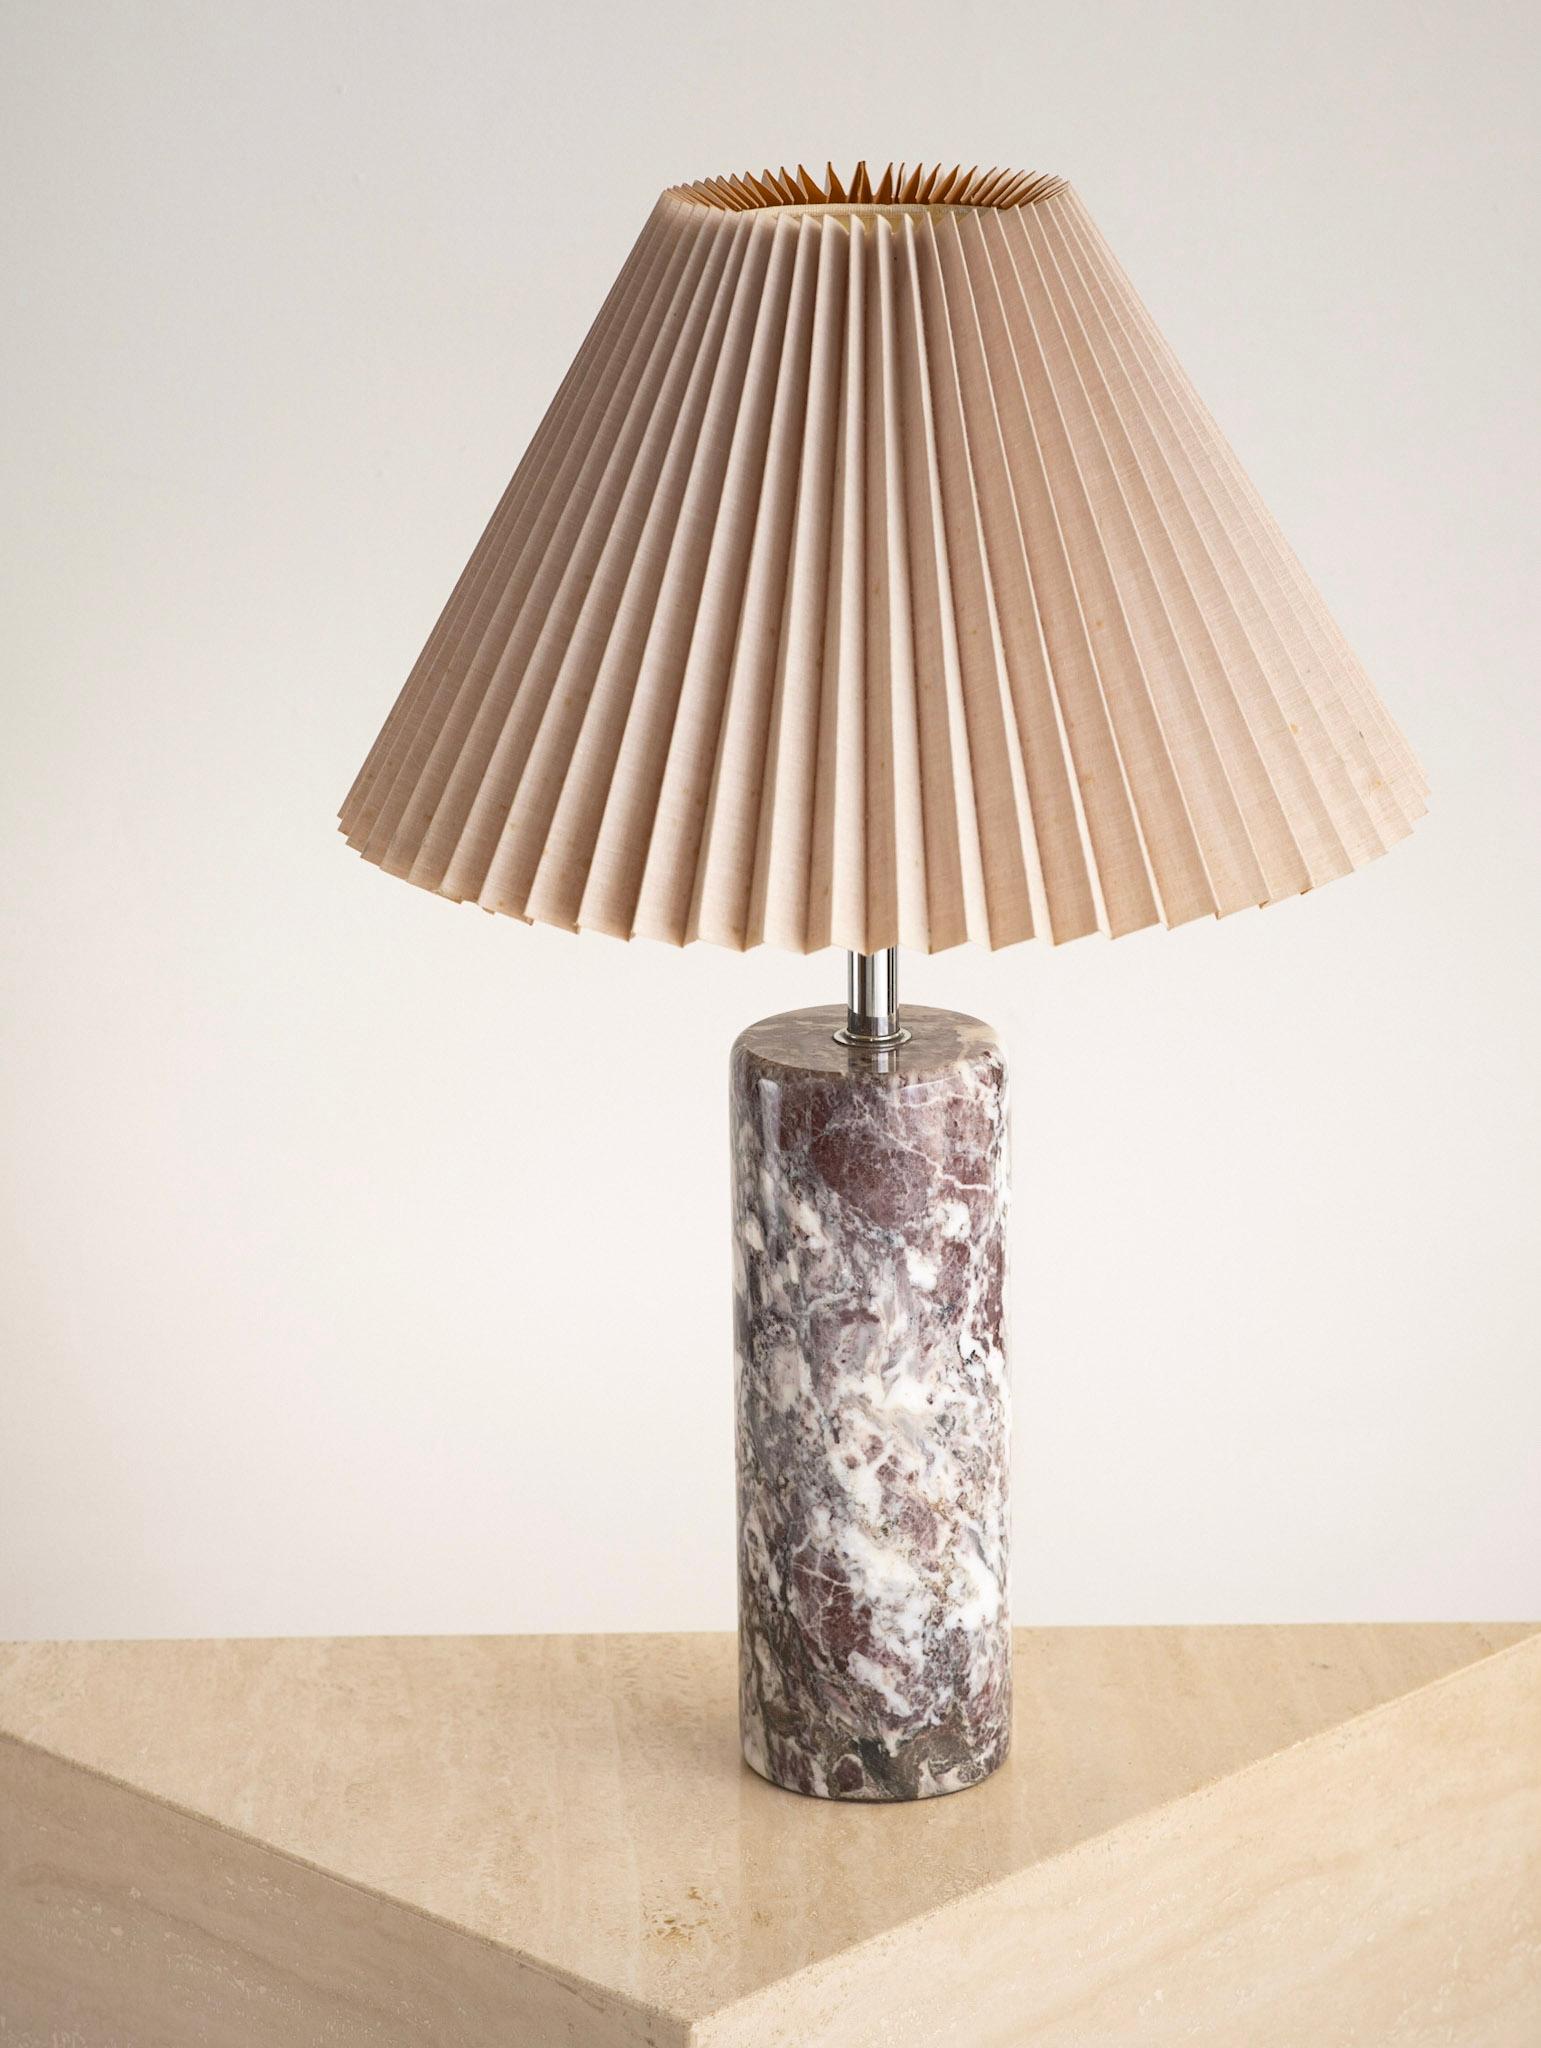 Nessen solid marble table lamp with chrome neck. Colors vary from shades of pink to whites and grays. Double bulb head and attached shade hardware. Shade not included. Marble base measures 15